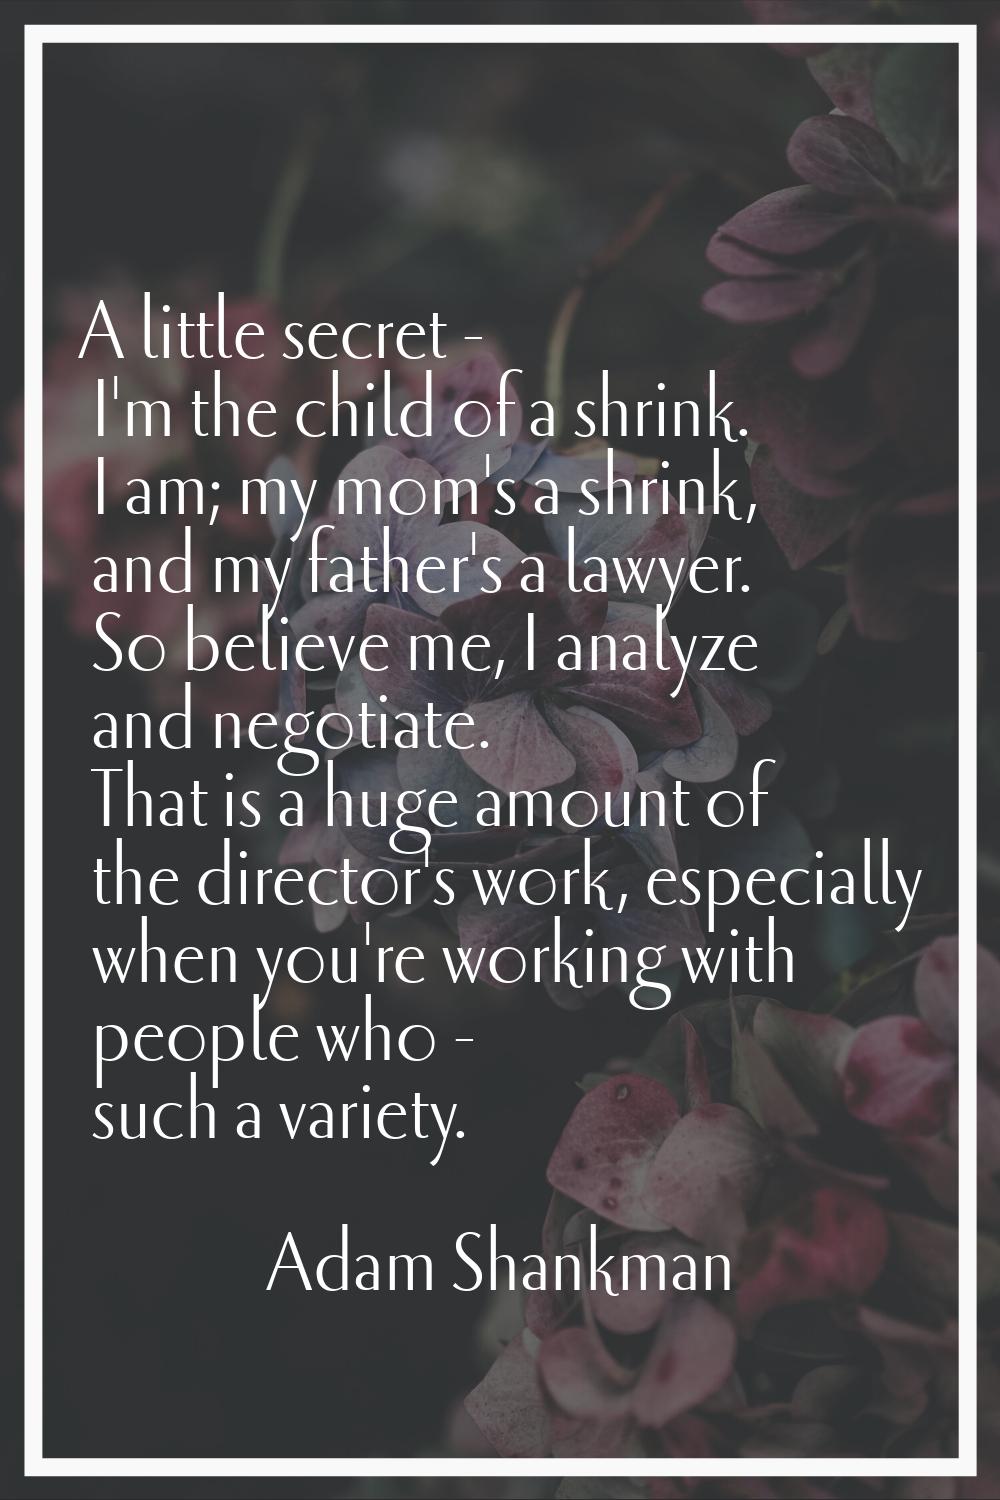 A little secret - I'm the child of a shrink. I am; my mom's a shrink, and my father's a lawyer. So 